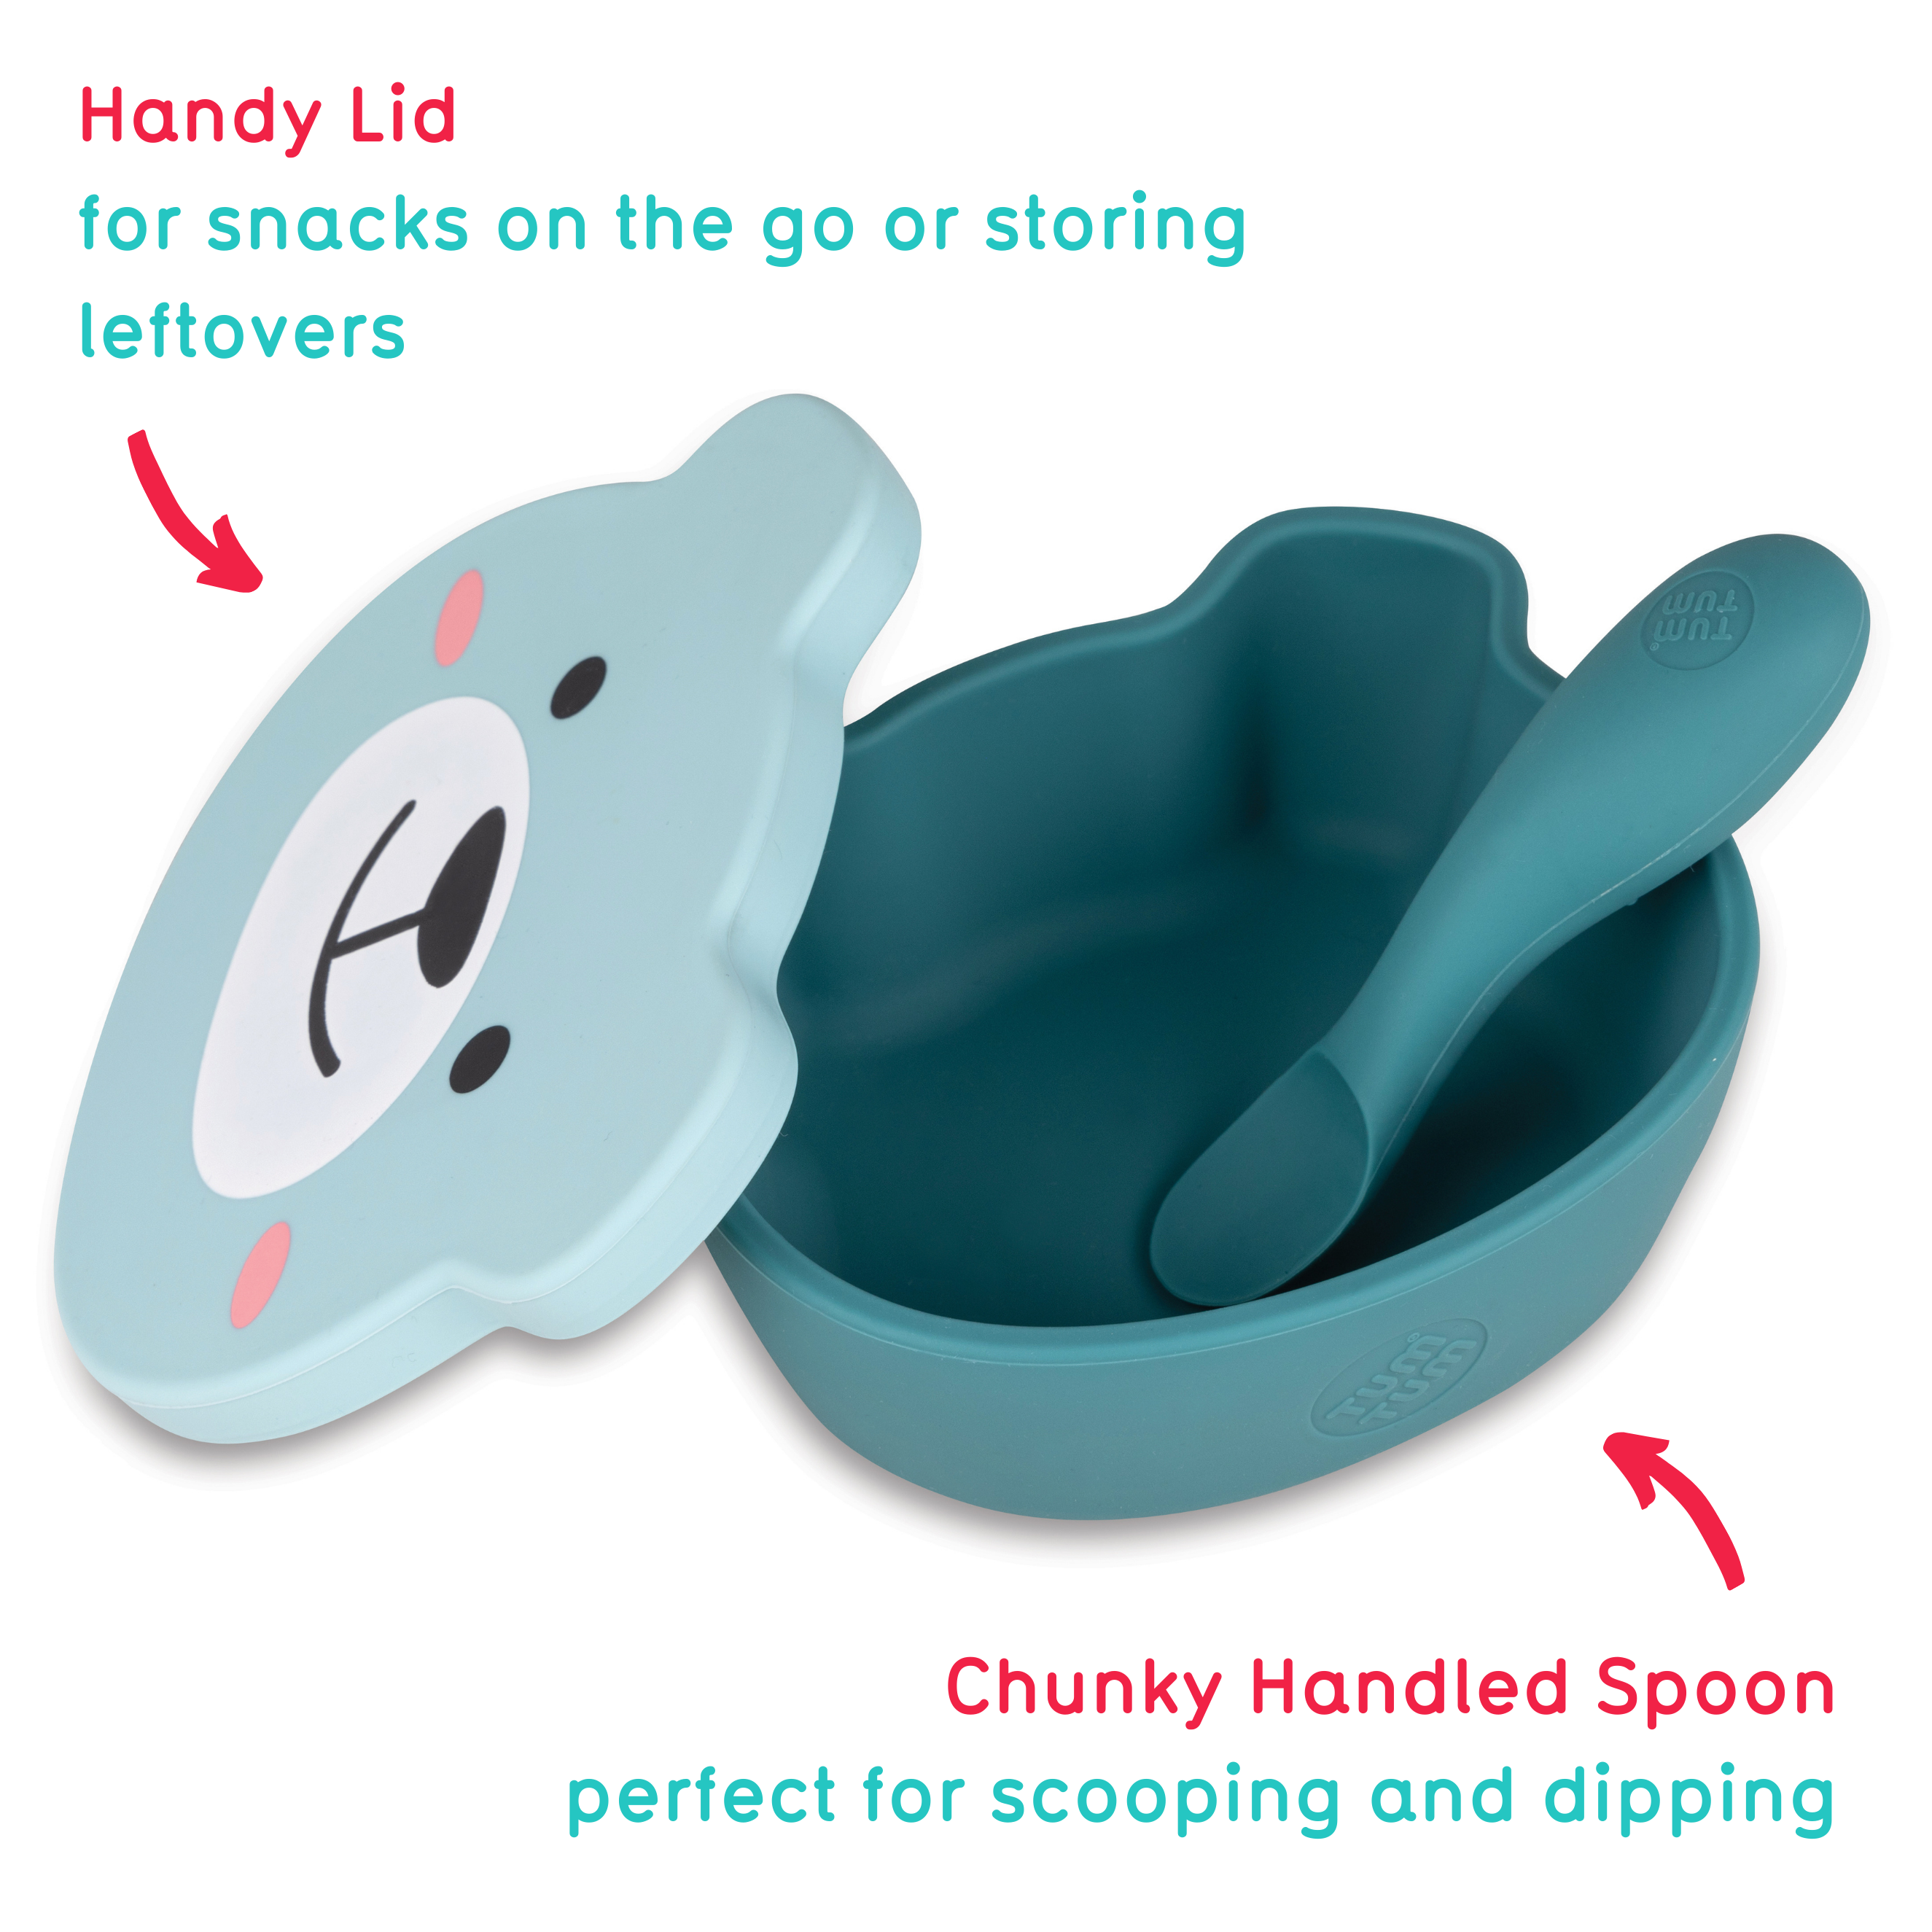 Magic Stay-put Baby Bowl & Spoon Set in Charming Teal – Ever After Baby